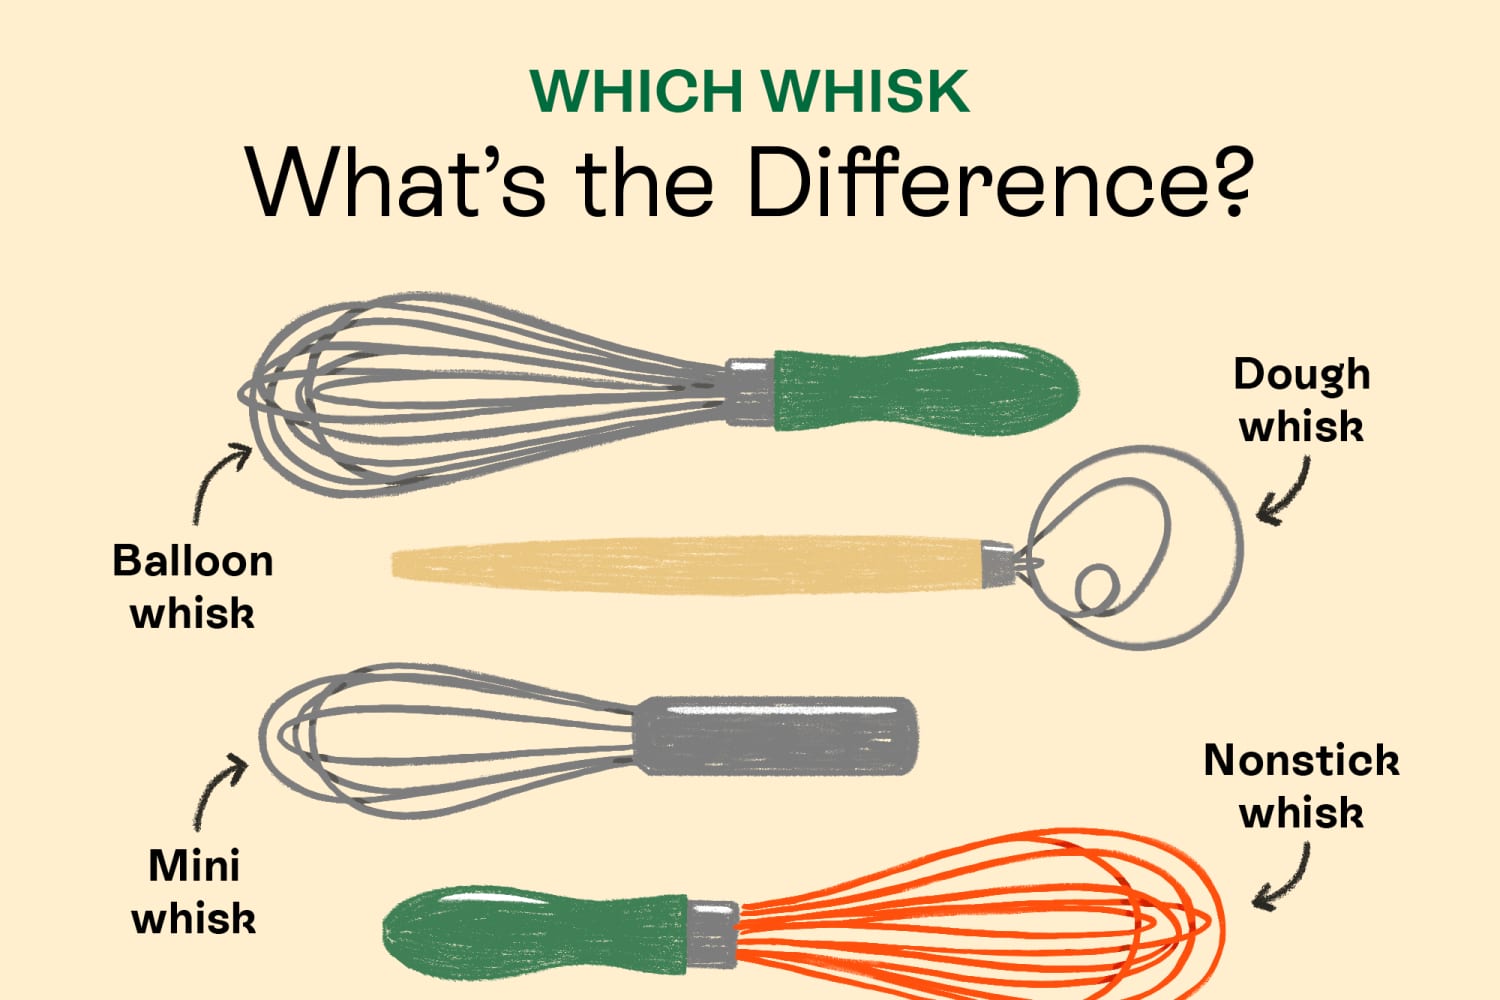 https://cdn.apartmenttherapy.info/image/upload/f_auto,q_auto:eco,c_fill,g_auto,w_1500,ar_3:2/k%2FDesign%2F2021-07%2Fwhich-whisk-what-the-difference-IG-2